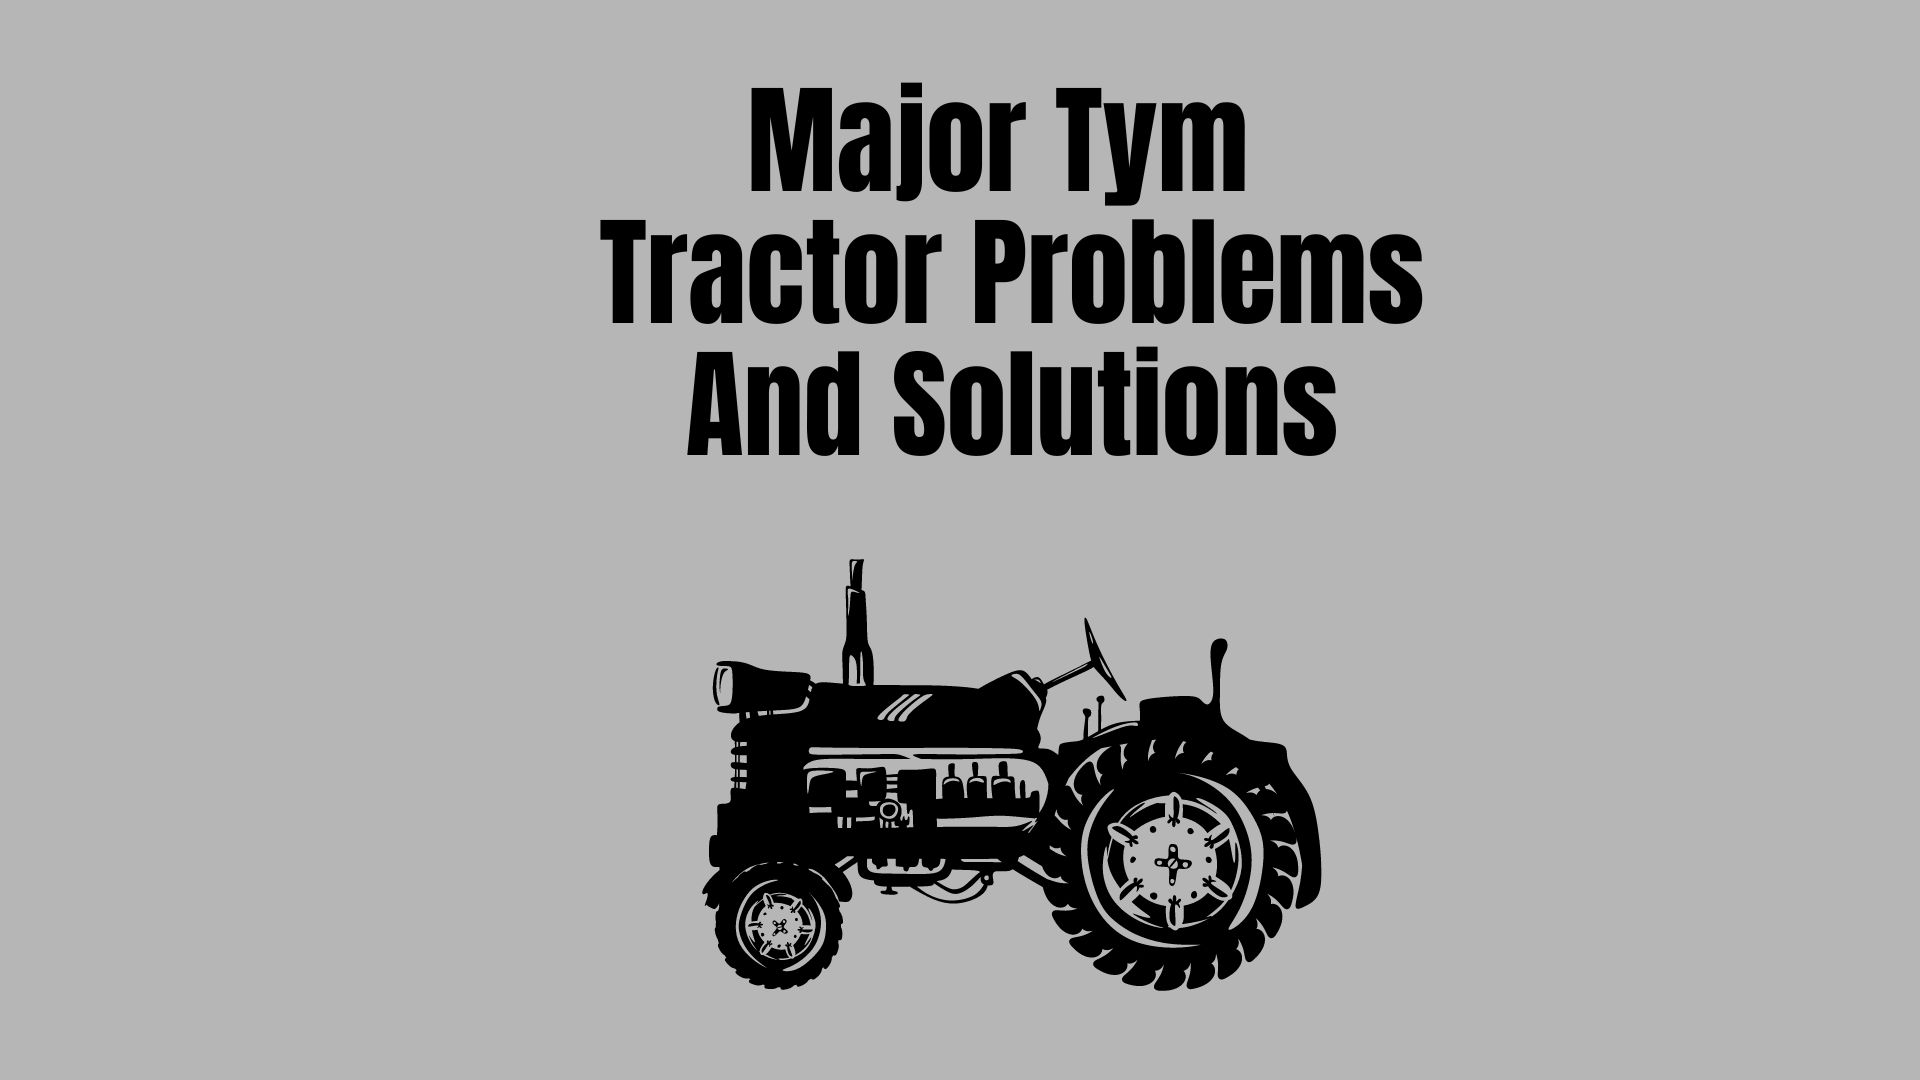 Major Tym Tractor Problems